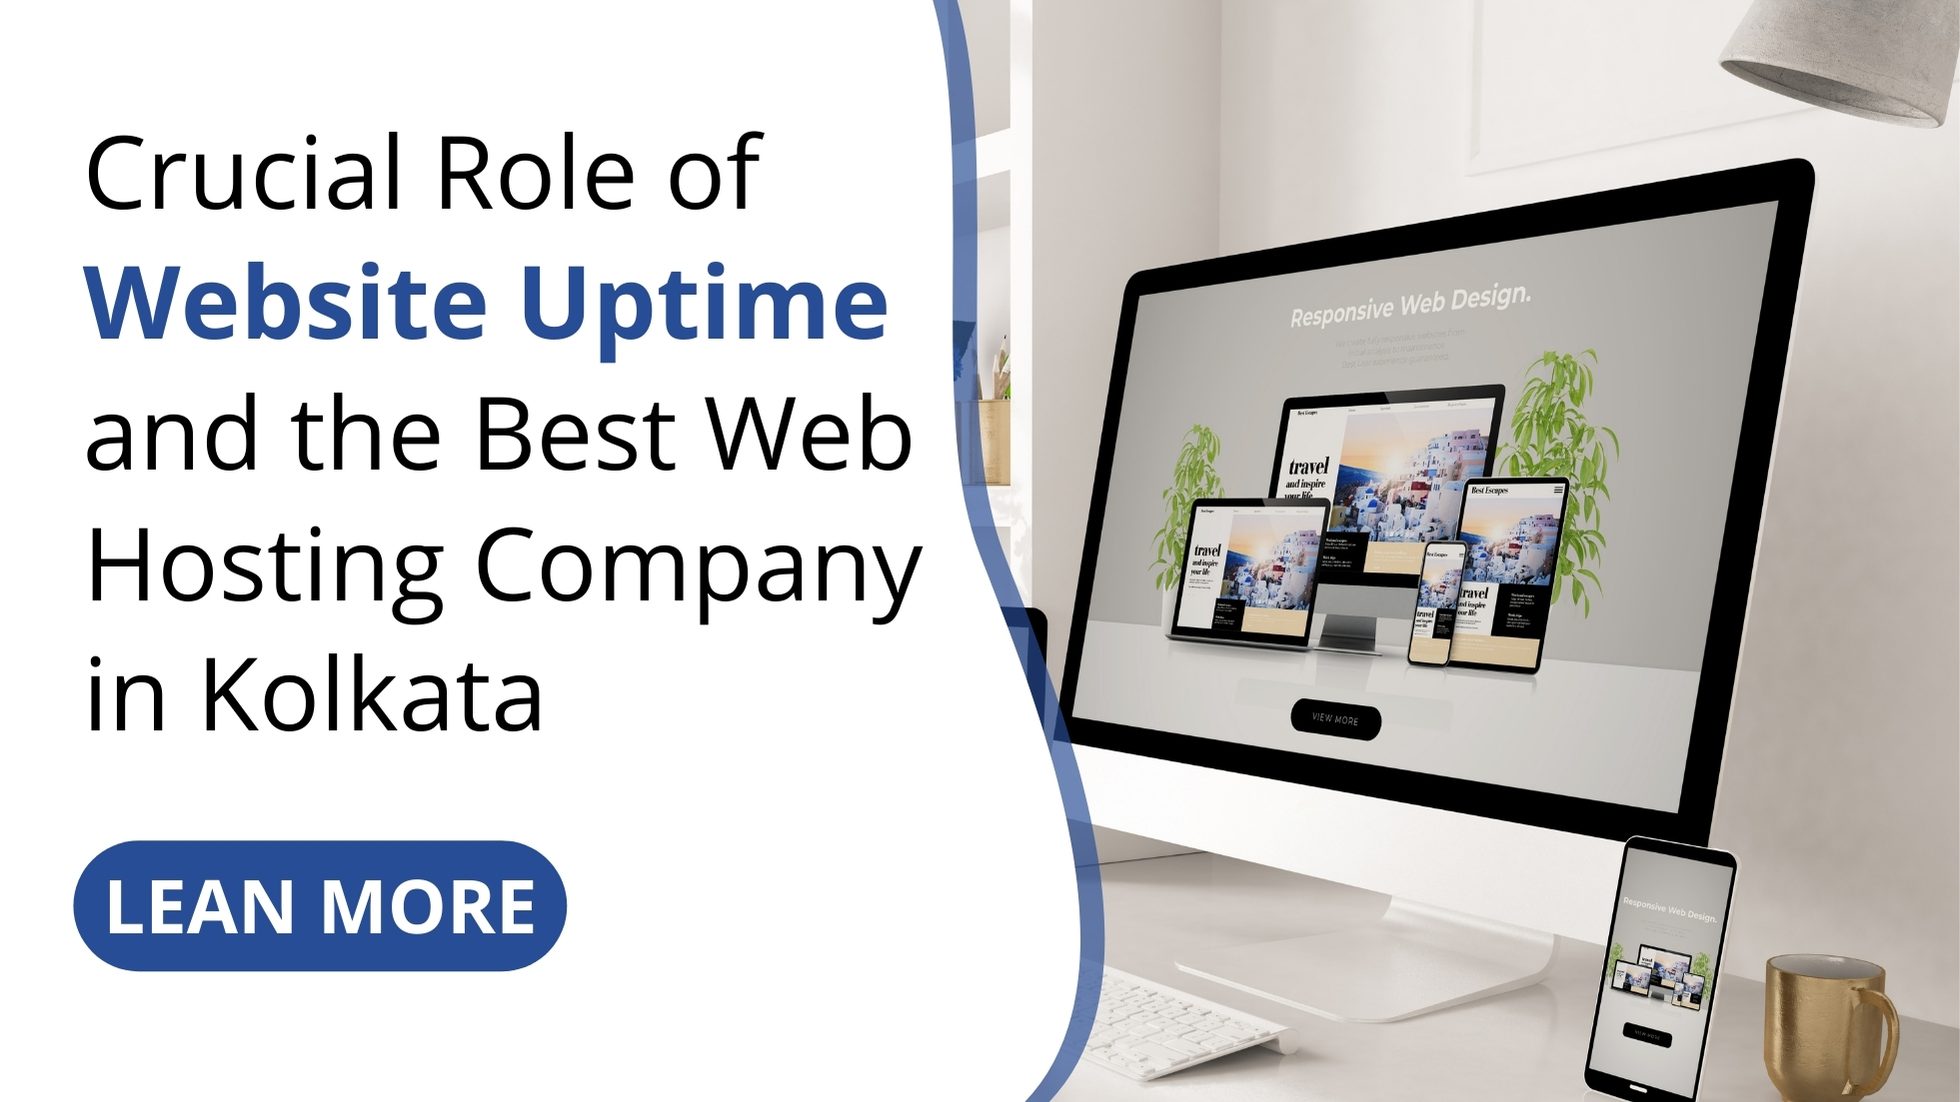 The Crucial Role of Website Uptime and the Best Web Hosting Company in Kolkata